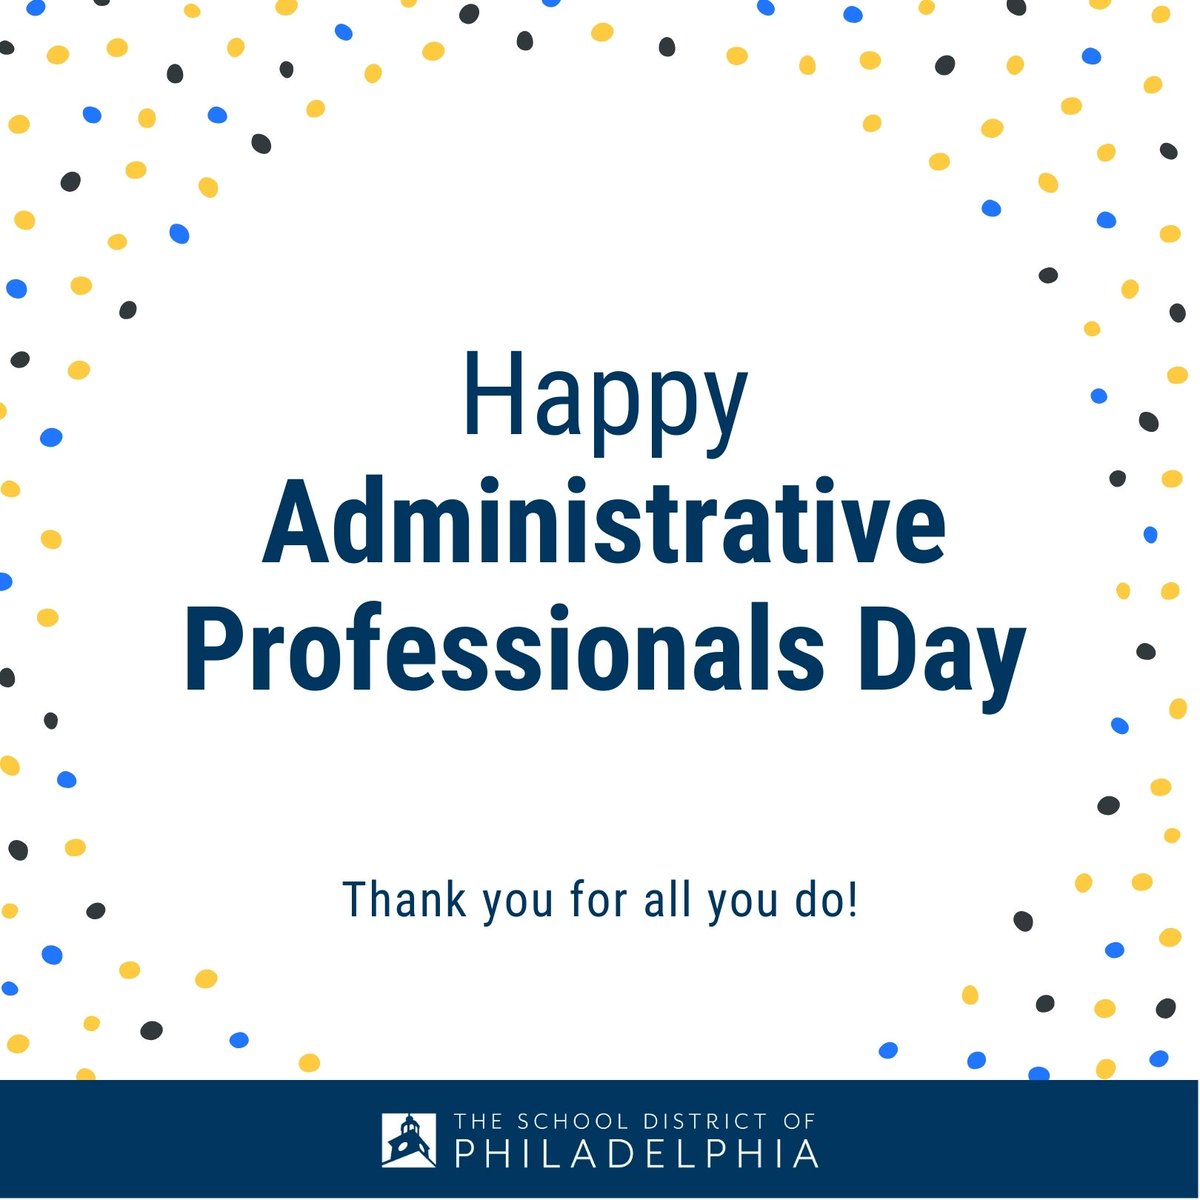 A special shout out to our secretaries, administrative assistants, executive assistants, clerks and other admin professionals on this Administrative Professionals Day! #PHLed